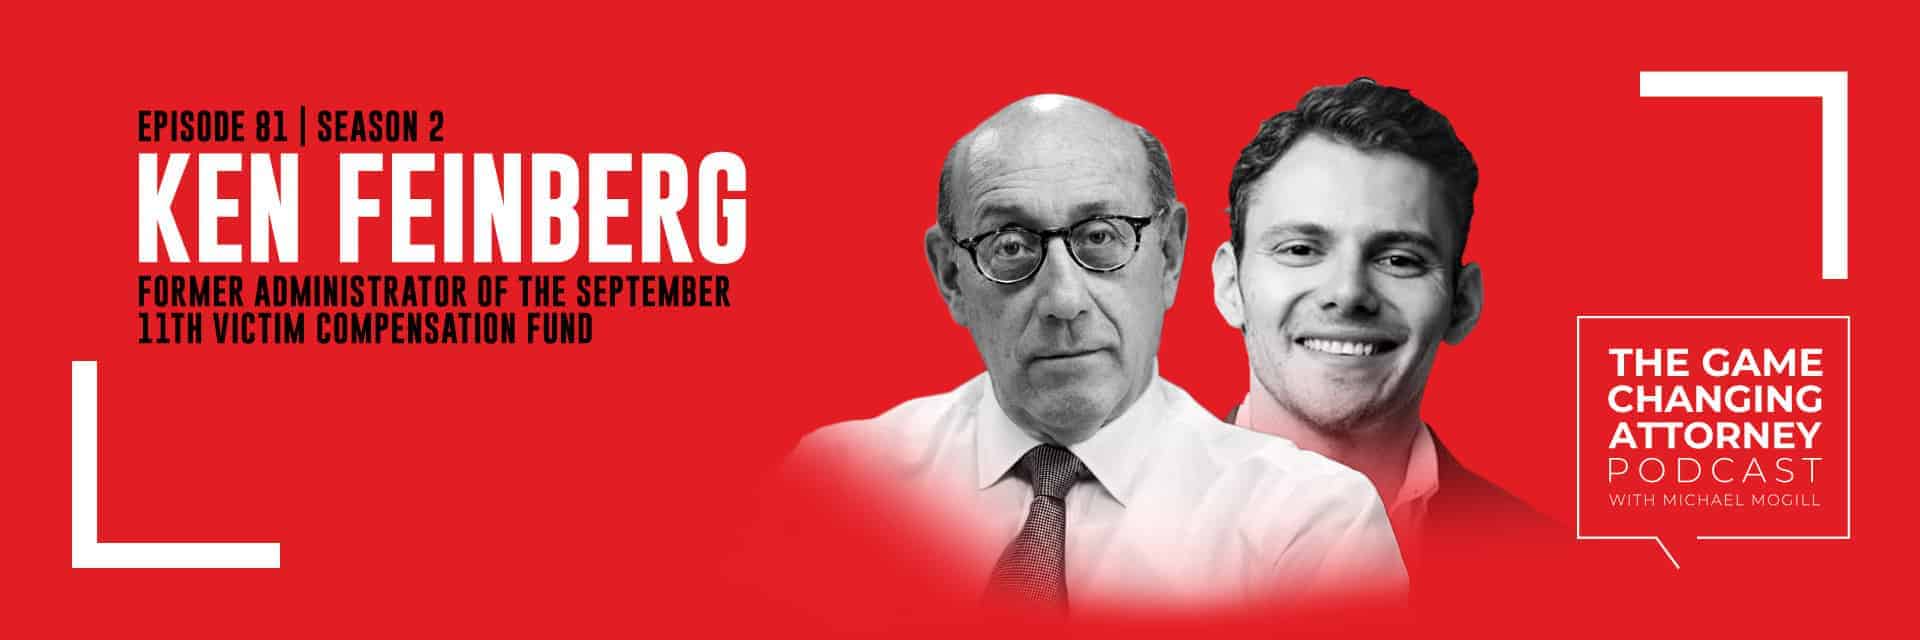 Ken Feinberg - The Game Changing Attorney Podcast - Desktop